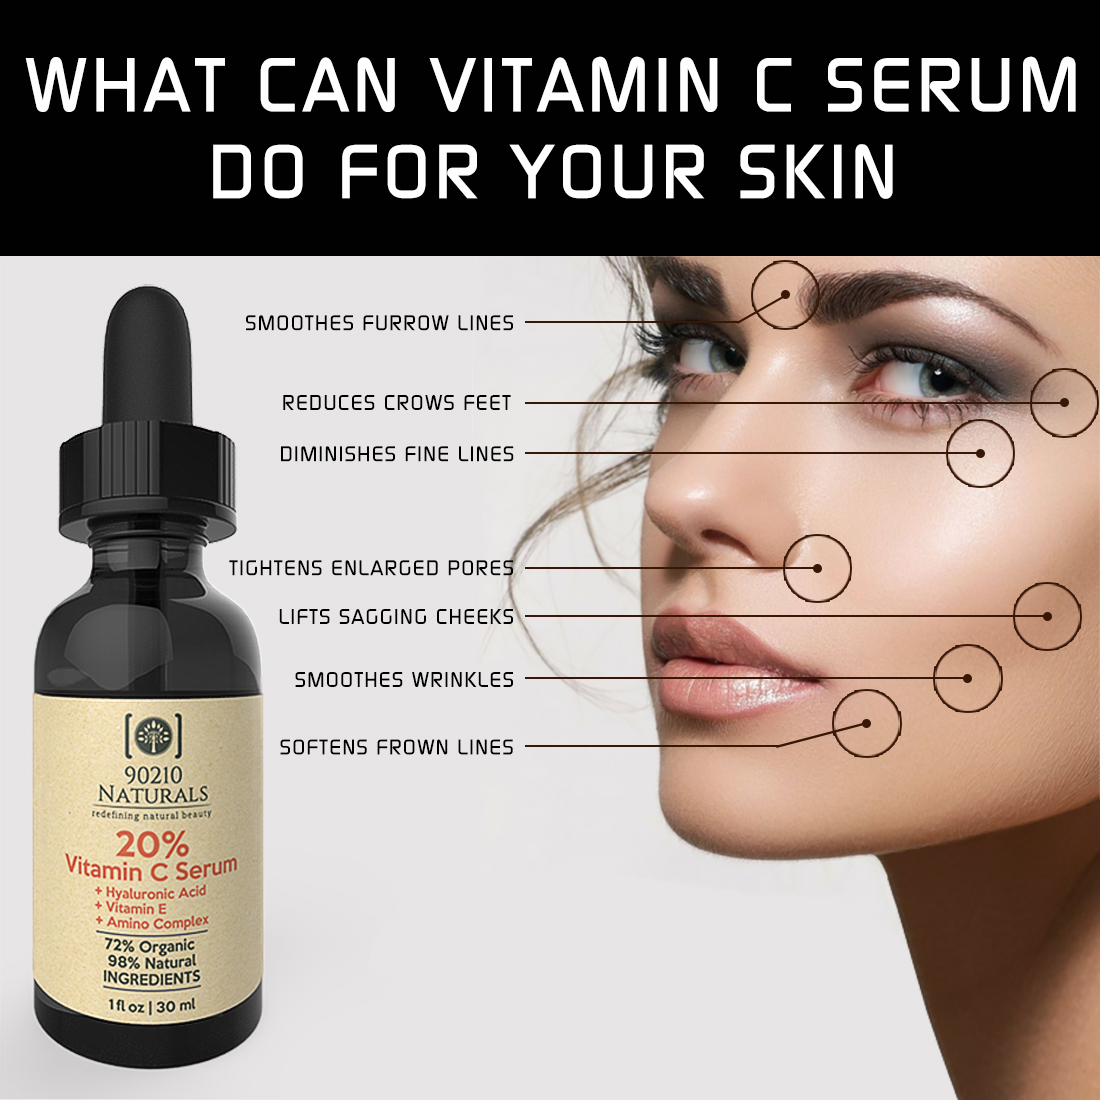 What Can Vitamin C Serum Do For Your Skin?